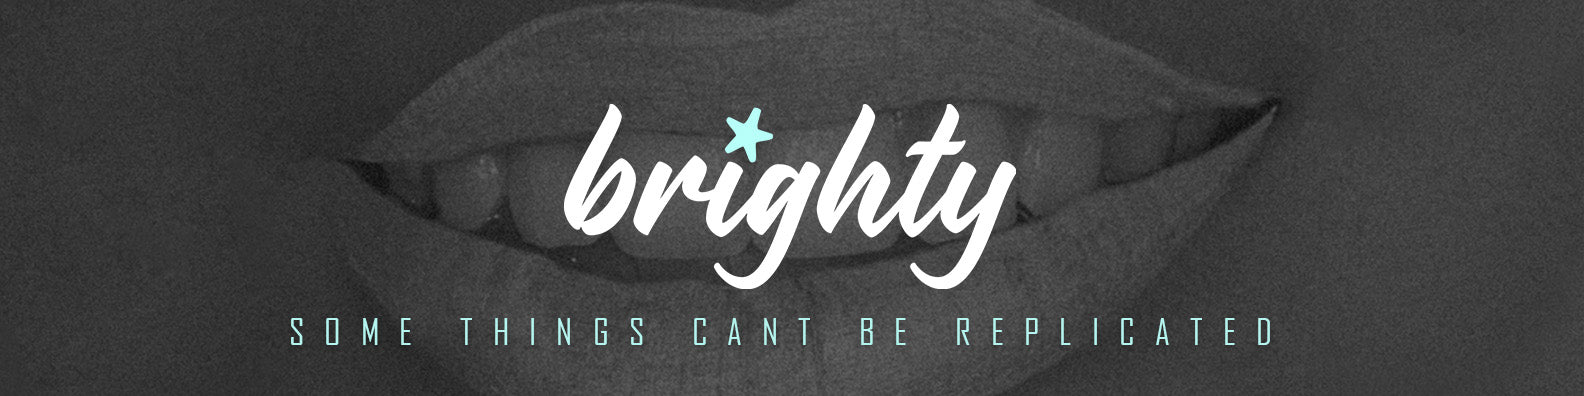 Brighty™ Teeth Whitening - Some things can't be replicated banner image.